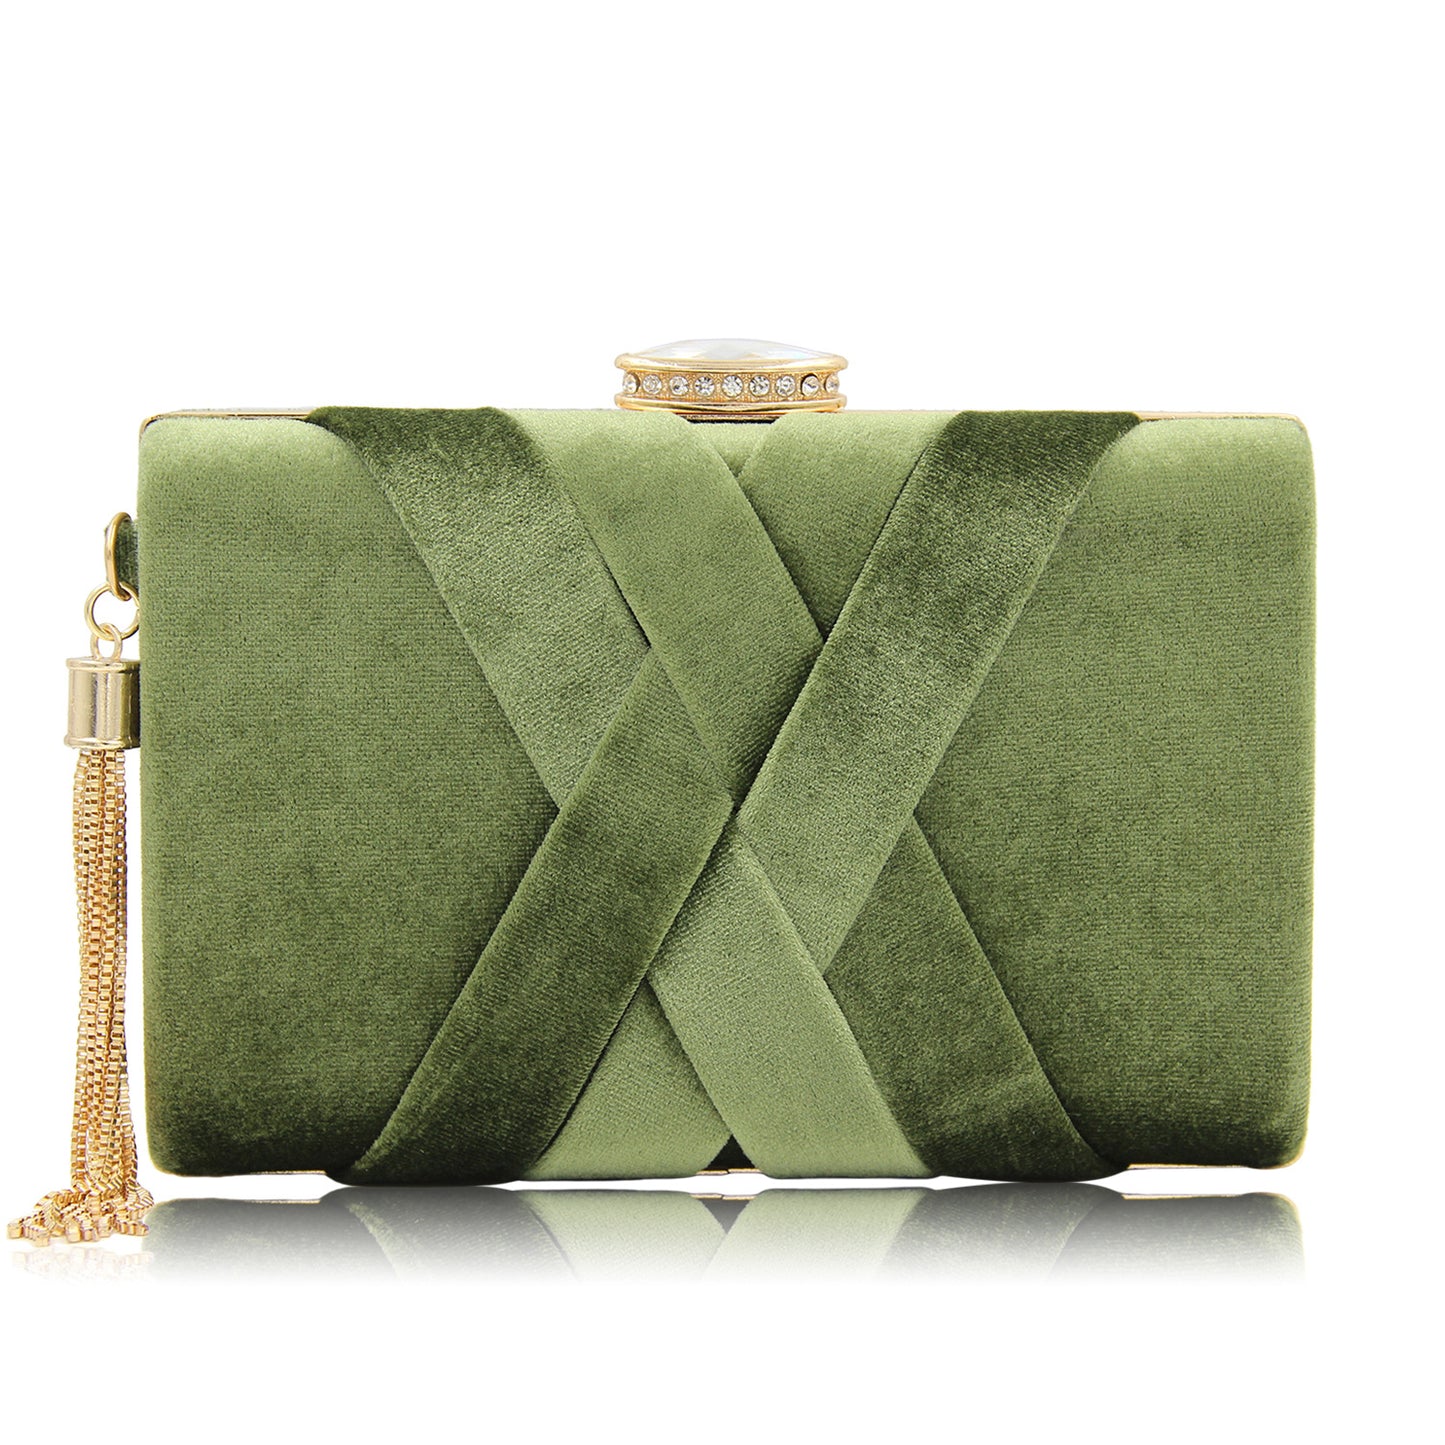 Women Clutch Bags - Top Quality Suede Clutches Purses